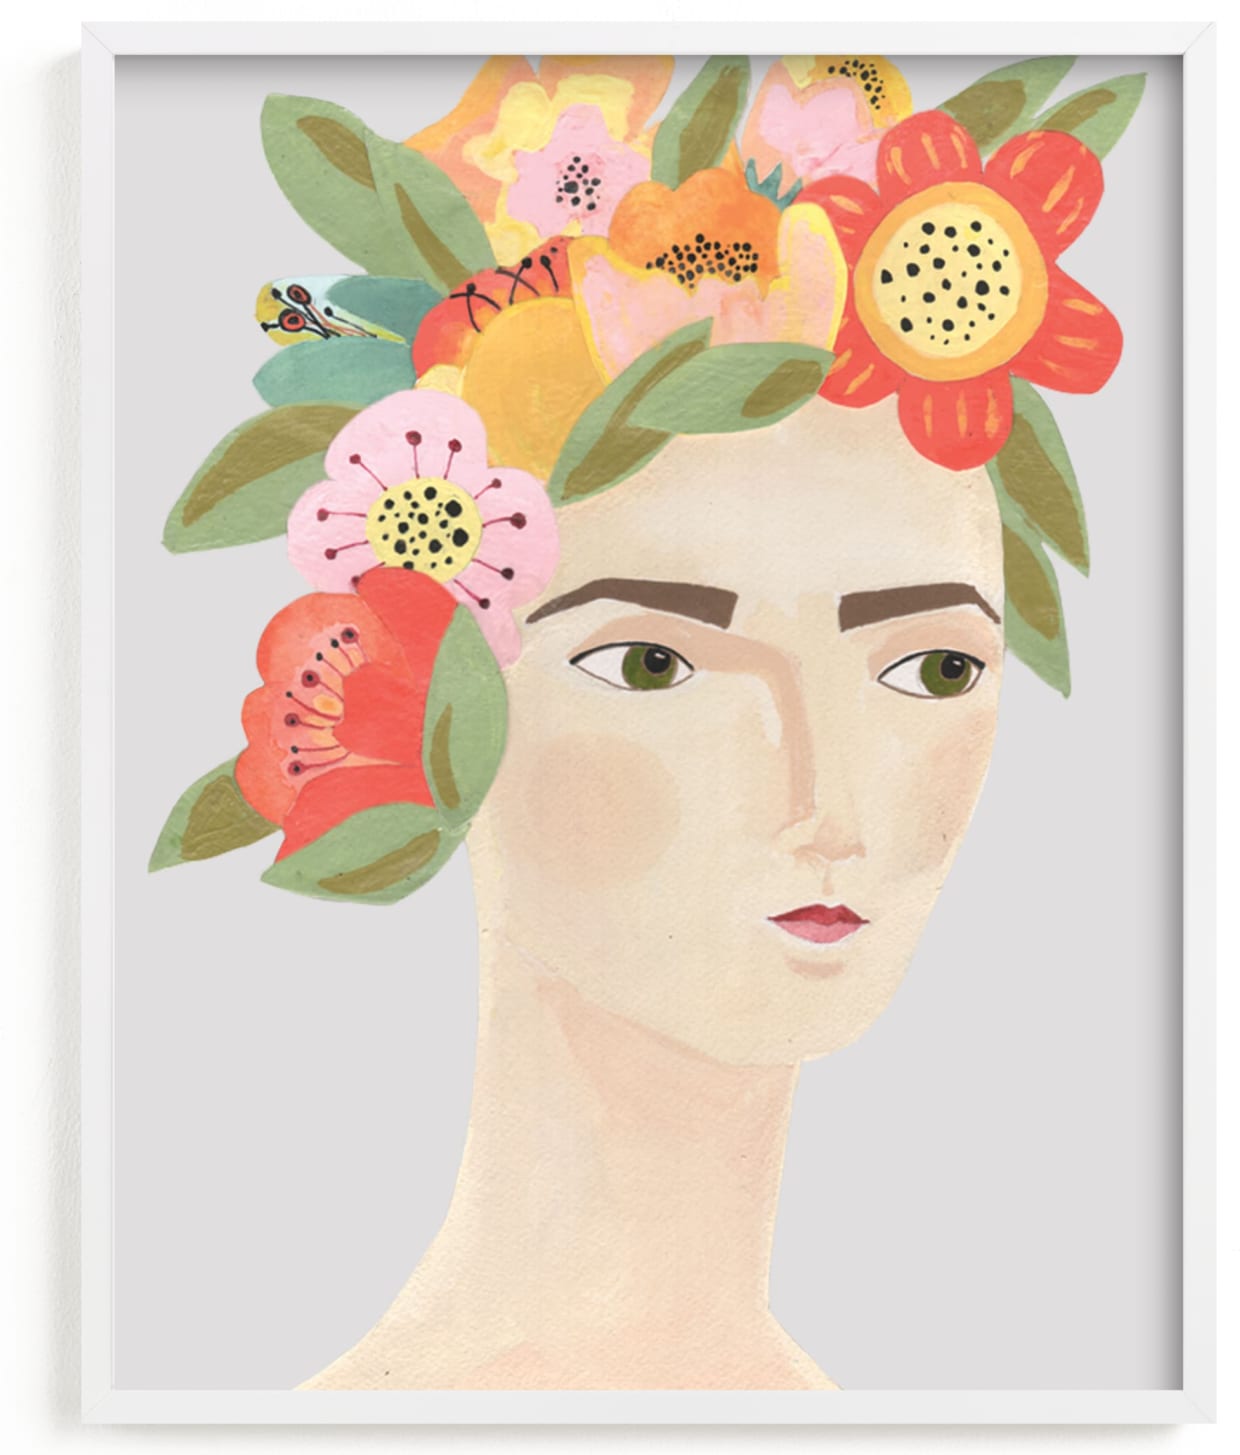 This is a colorful kids wall art by Candace Wiant called Flower Crown.